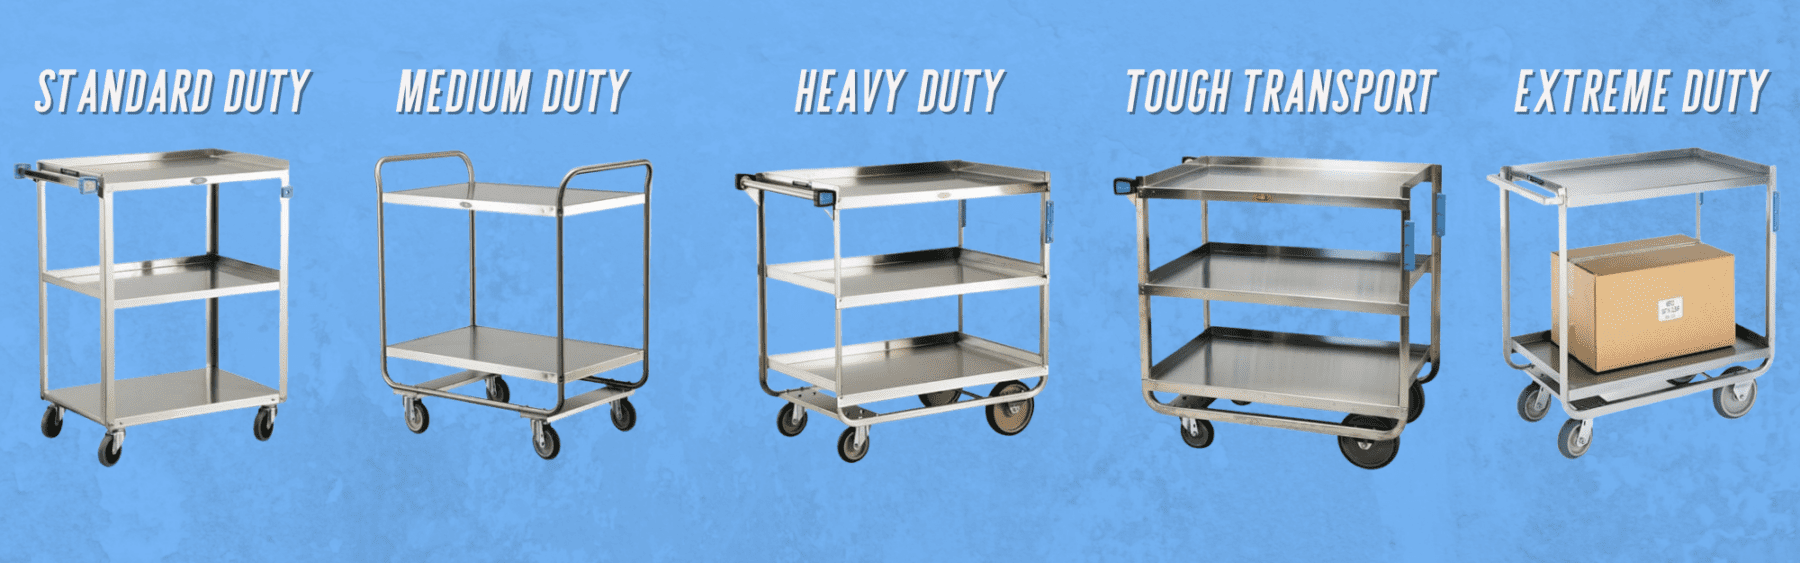 standard, medium, heavy, transport, and extreme duty utility carts